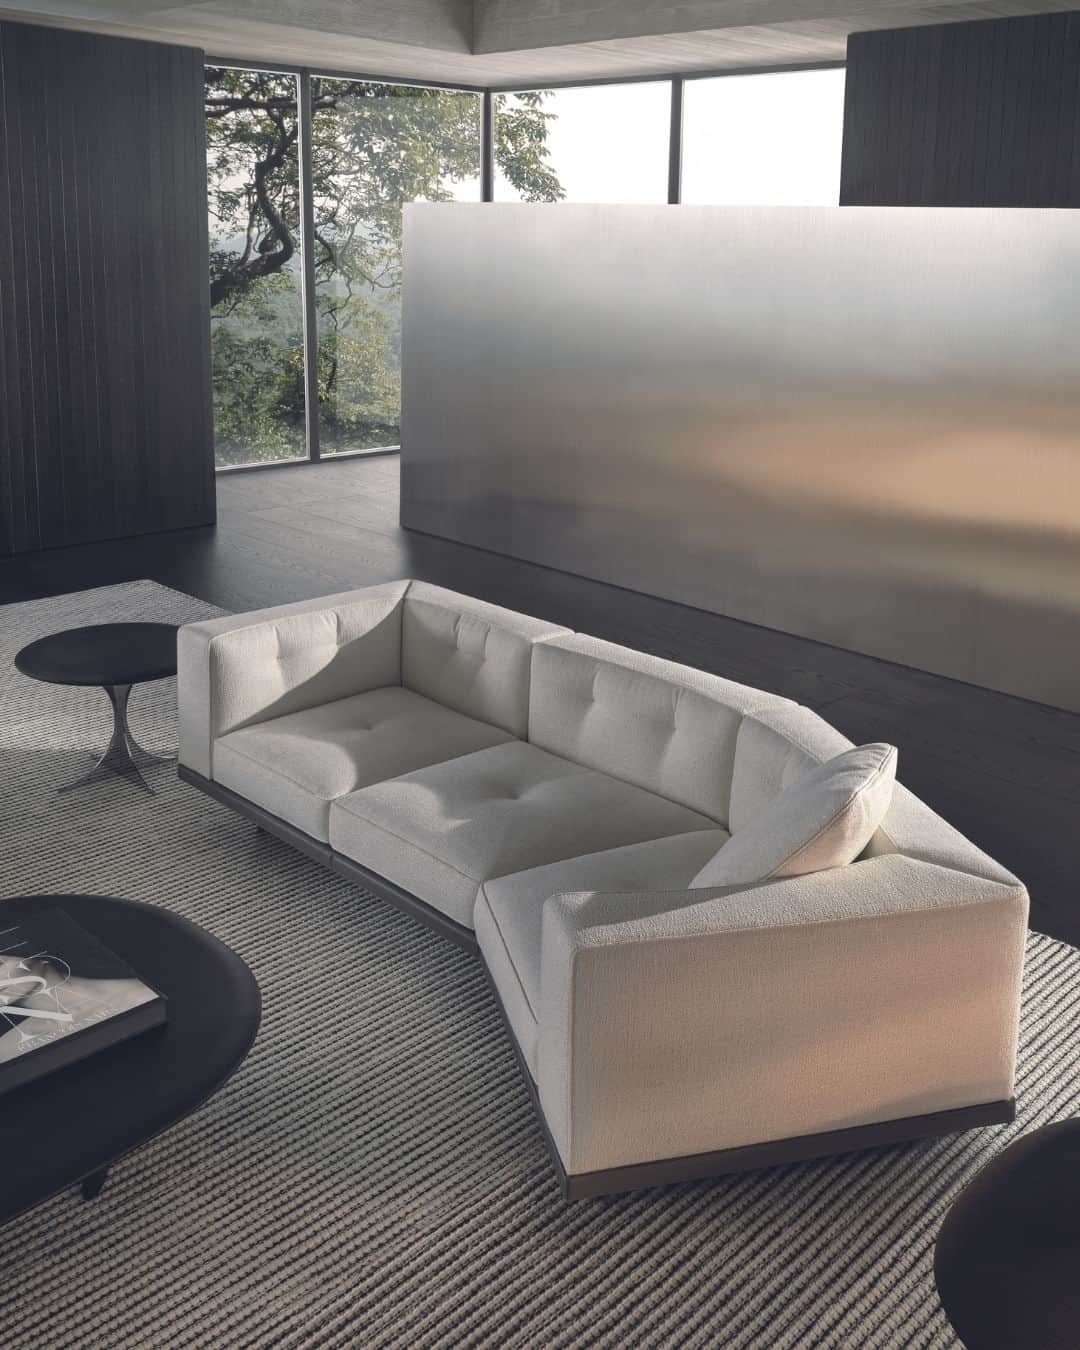 Minotti Londonのインスタグラム：「The rigorous and welcoming modular seating system Dylan is also available in a version with a more compact seat depth. Introducing Dylan Small, a system that combines the sophisticated aesthetics of its cushions with the lightness of a contemporary base raised 13,5 cm from the floor.  The upholstered volumes are reduced in depth, making Dylan Small a perfect fit even in smaller domestic environments or in Hospitality spaces.  @rodolfodordoni design.  Tap the link in our bio to discover the Dylan Small Sofa.  #dylan #minotti #minottilondon #rodolfodordoni #interiordesign #design #madeinitaly #italianfurniture #italianstyle #sofa #luxurysofa #luxuryfurniture」